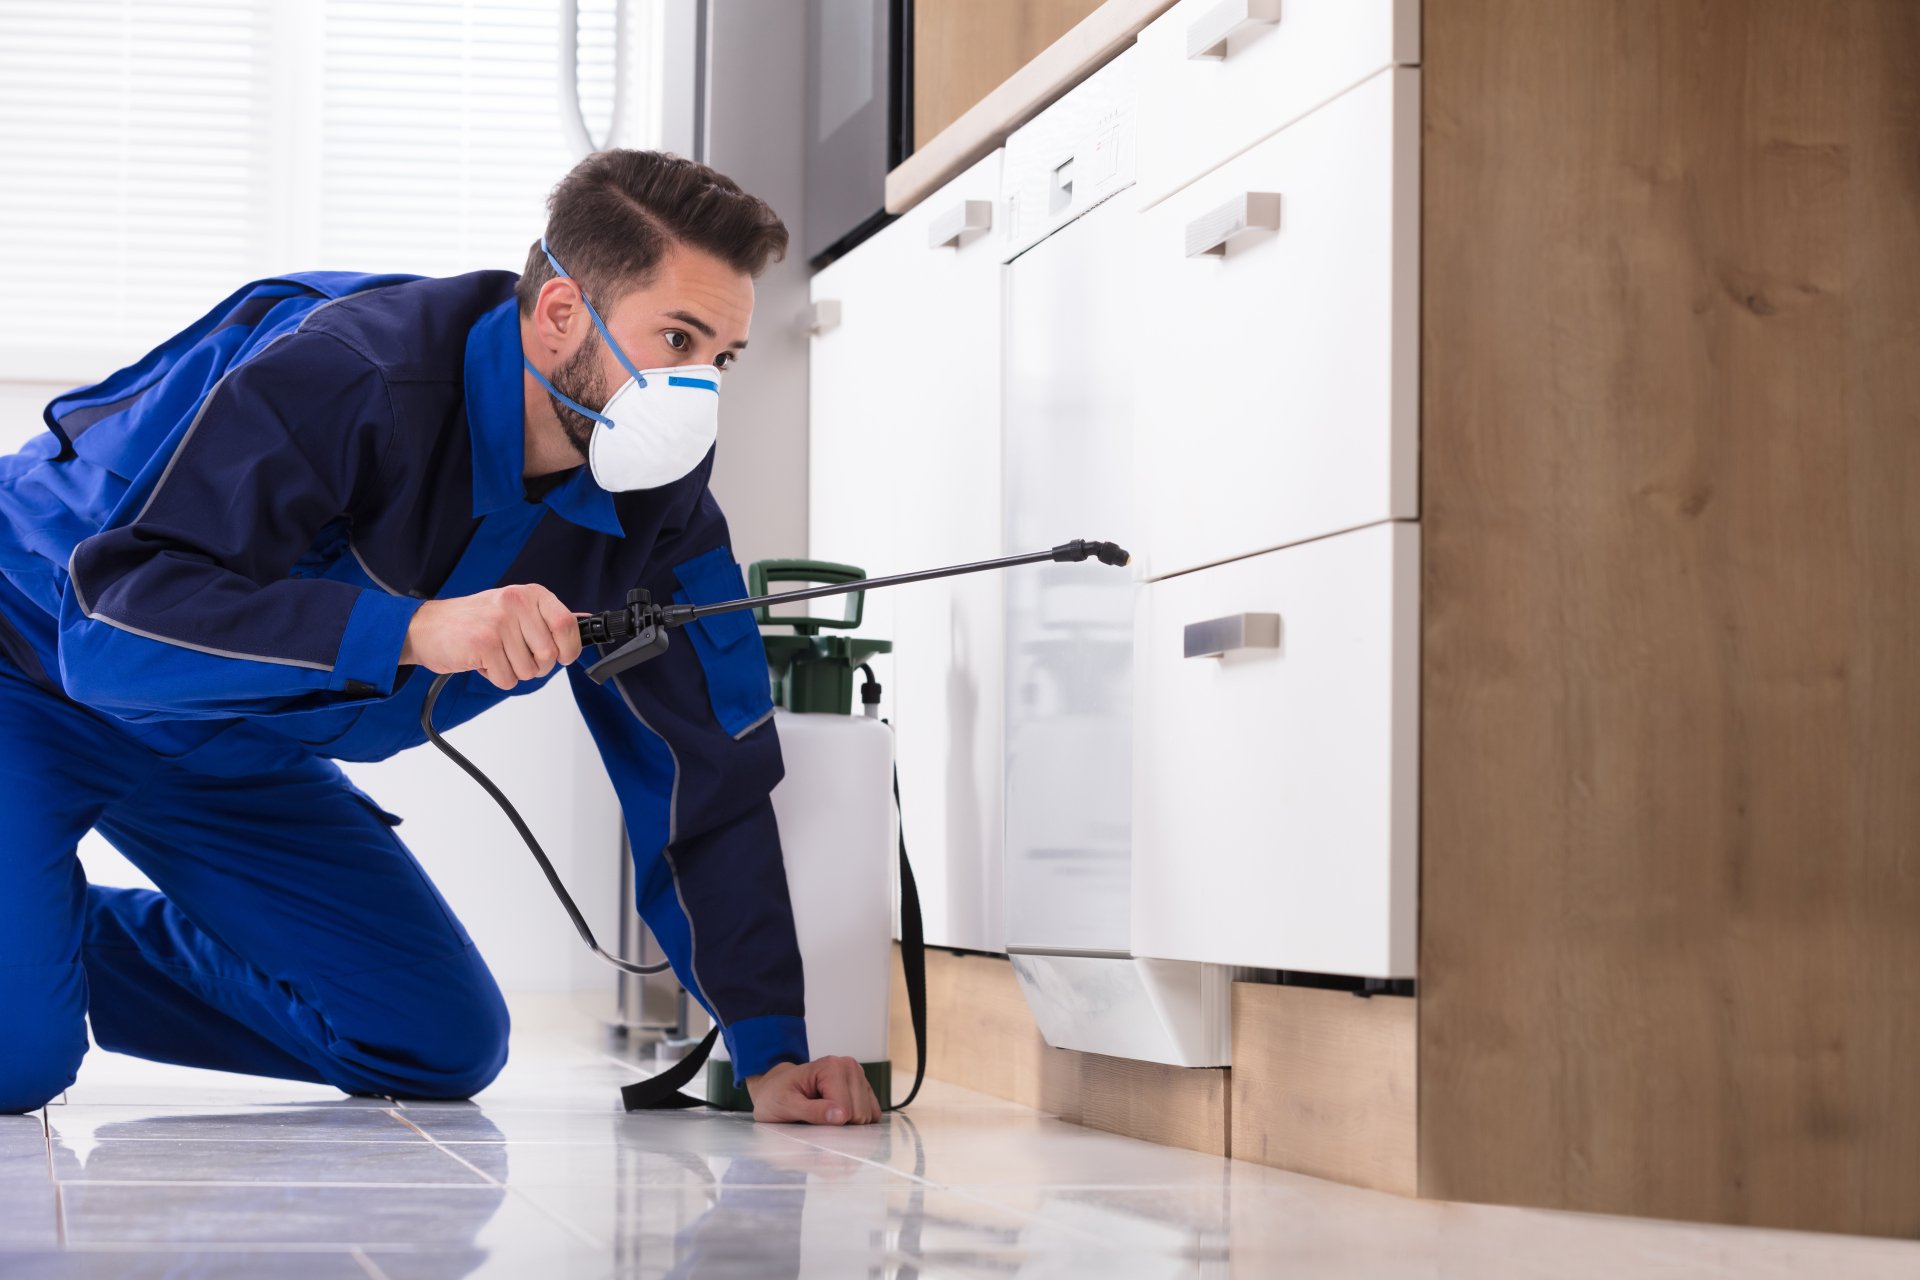 Pest Control Services: Protecting Your Property and Loved Ones from Pest Infestations